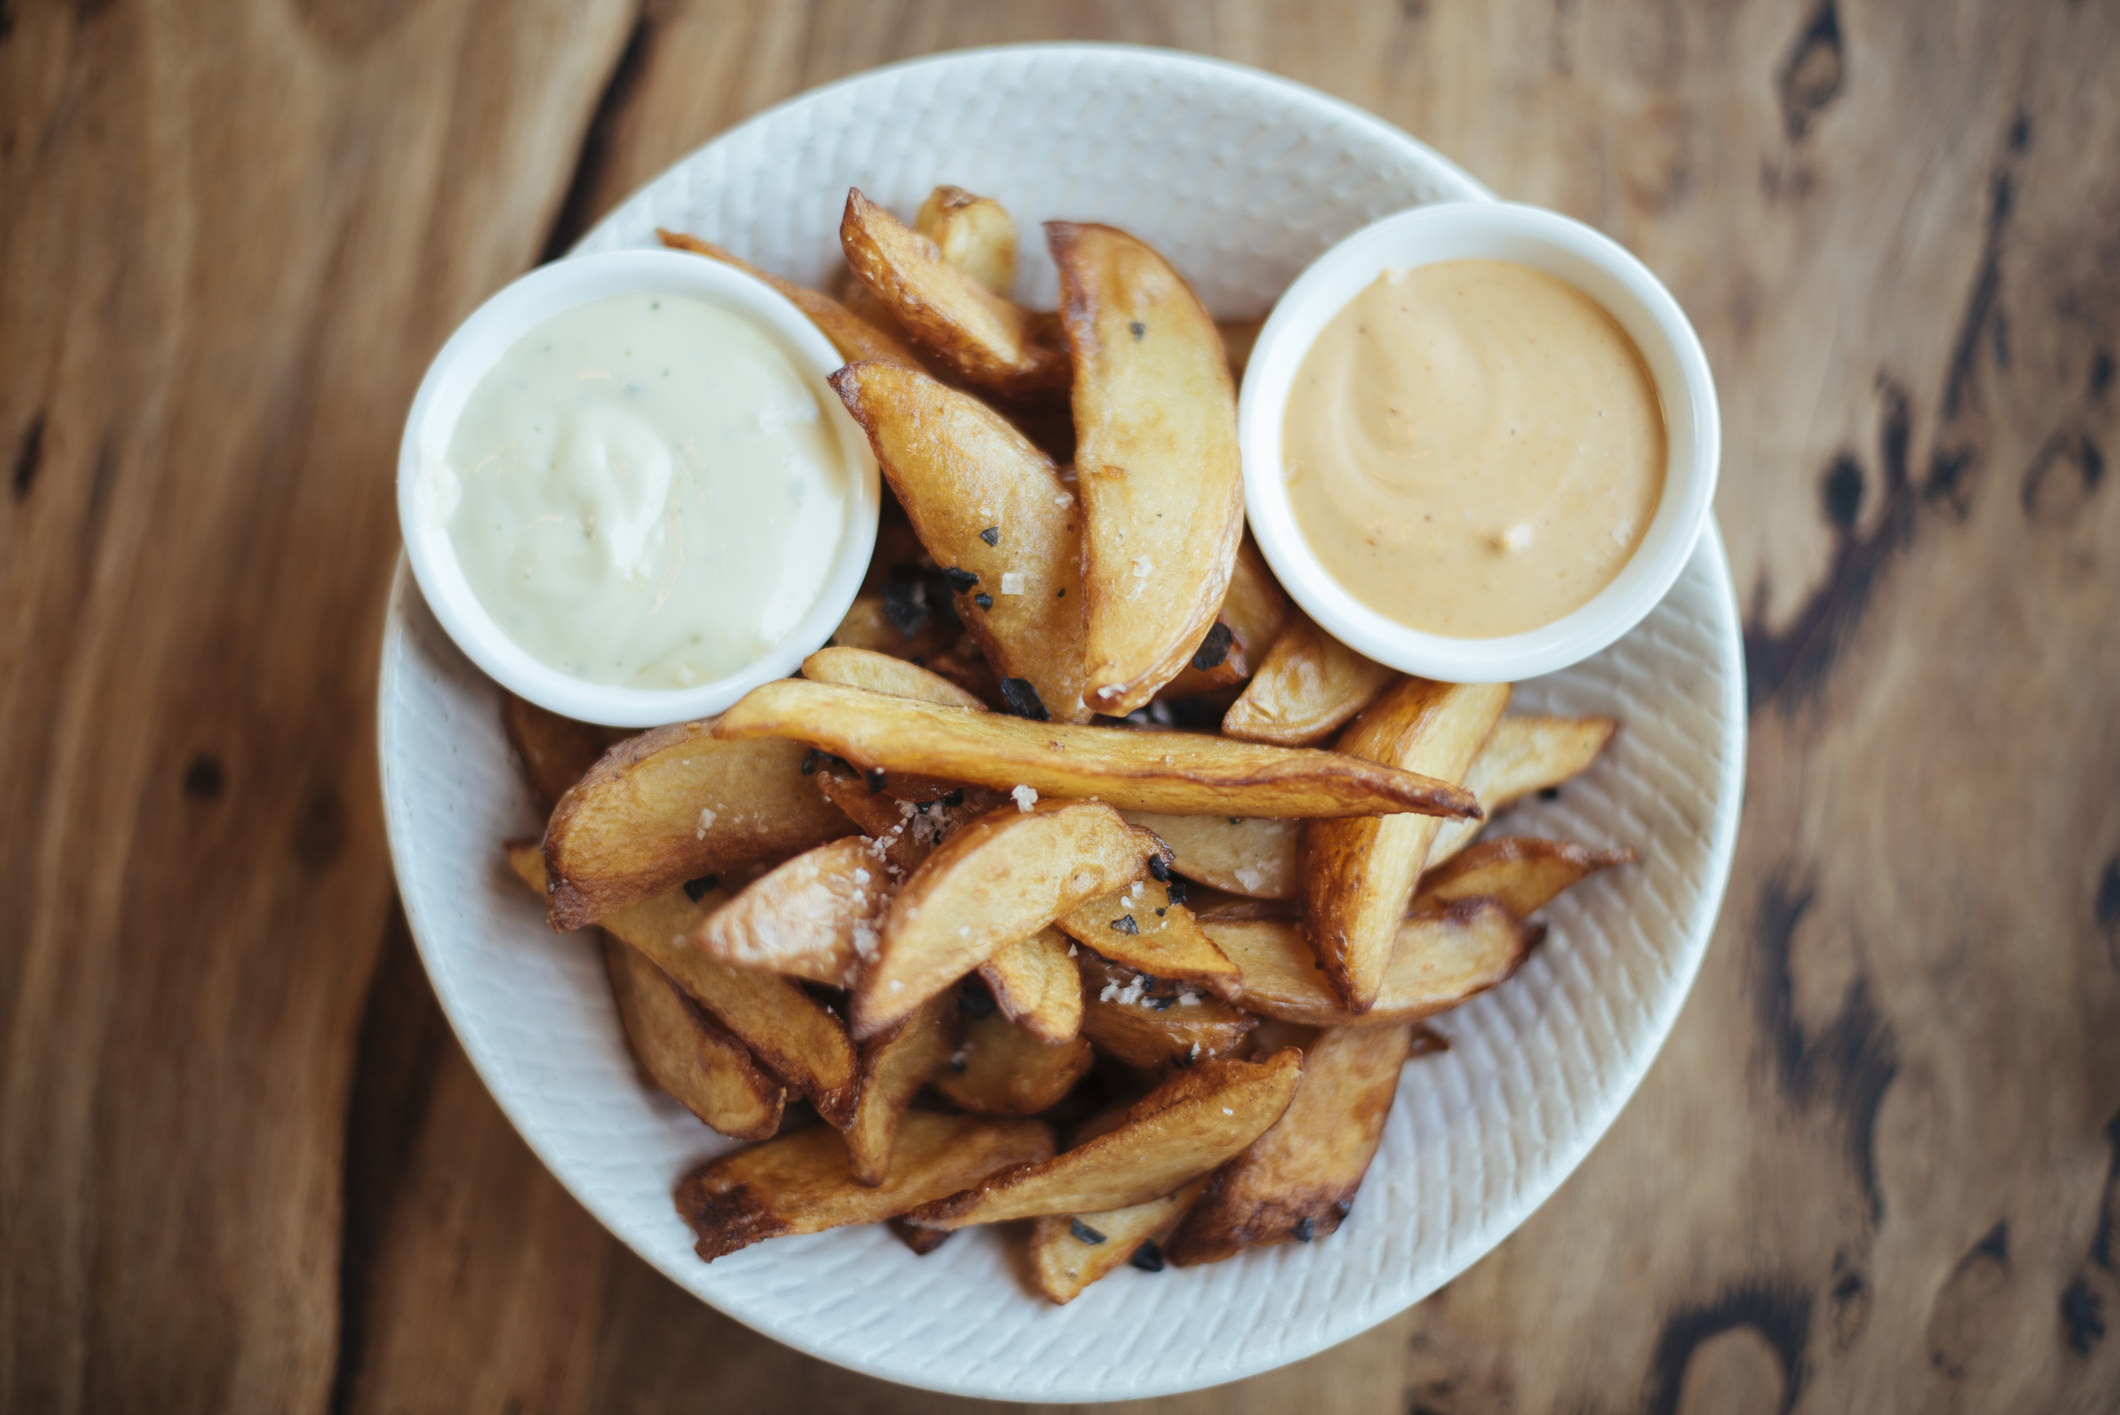 Potato wedges with two types of aioli.